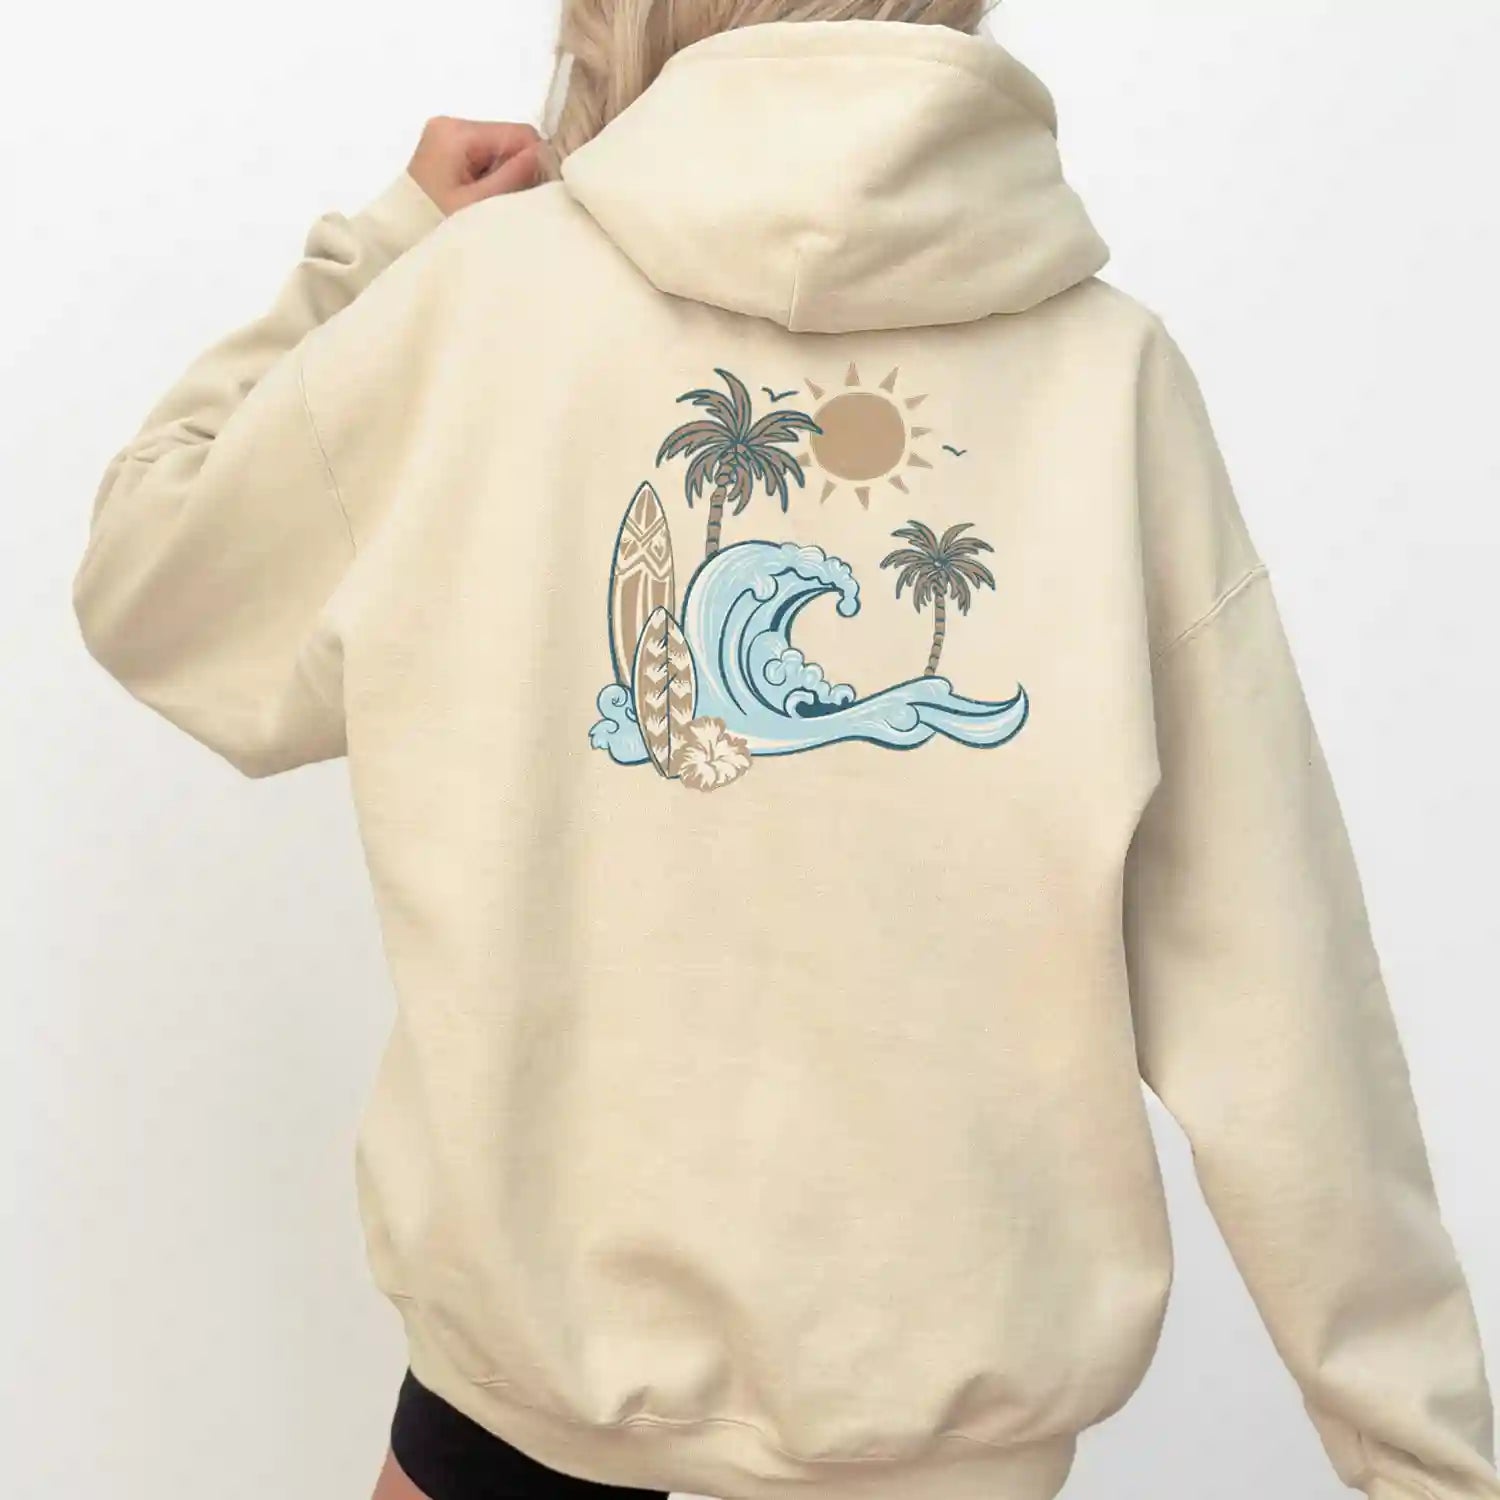 A woman wearing a hoodie with palm trees, representing the Nalu o ka Mana (Waves of Faith) Hoodie by Be Still and Know.